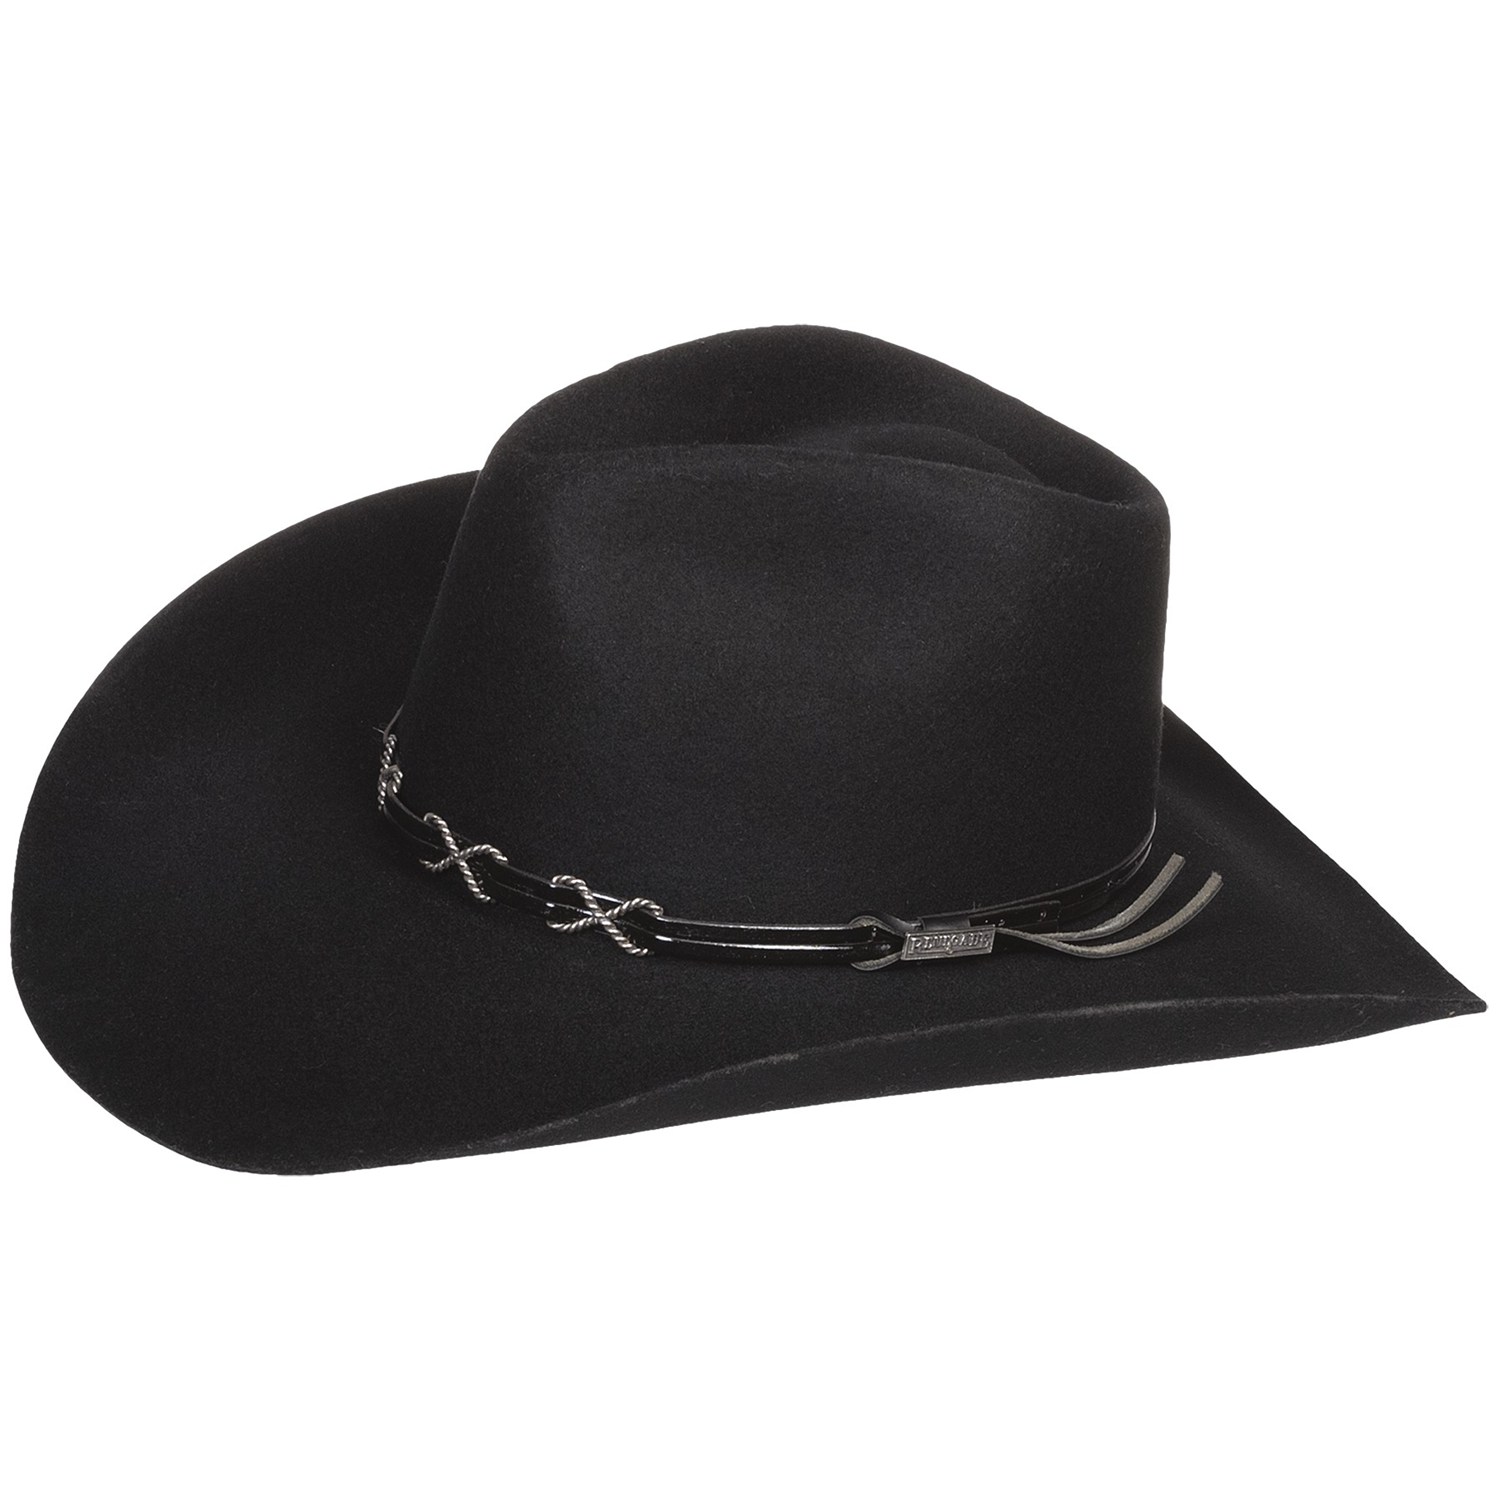 43 Cowboy Hat Pic Free Cliparts That You Can Download To You Computer    